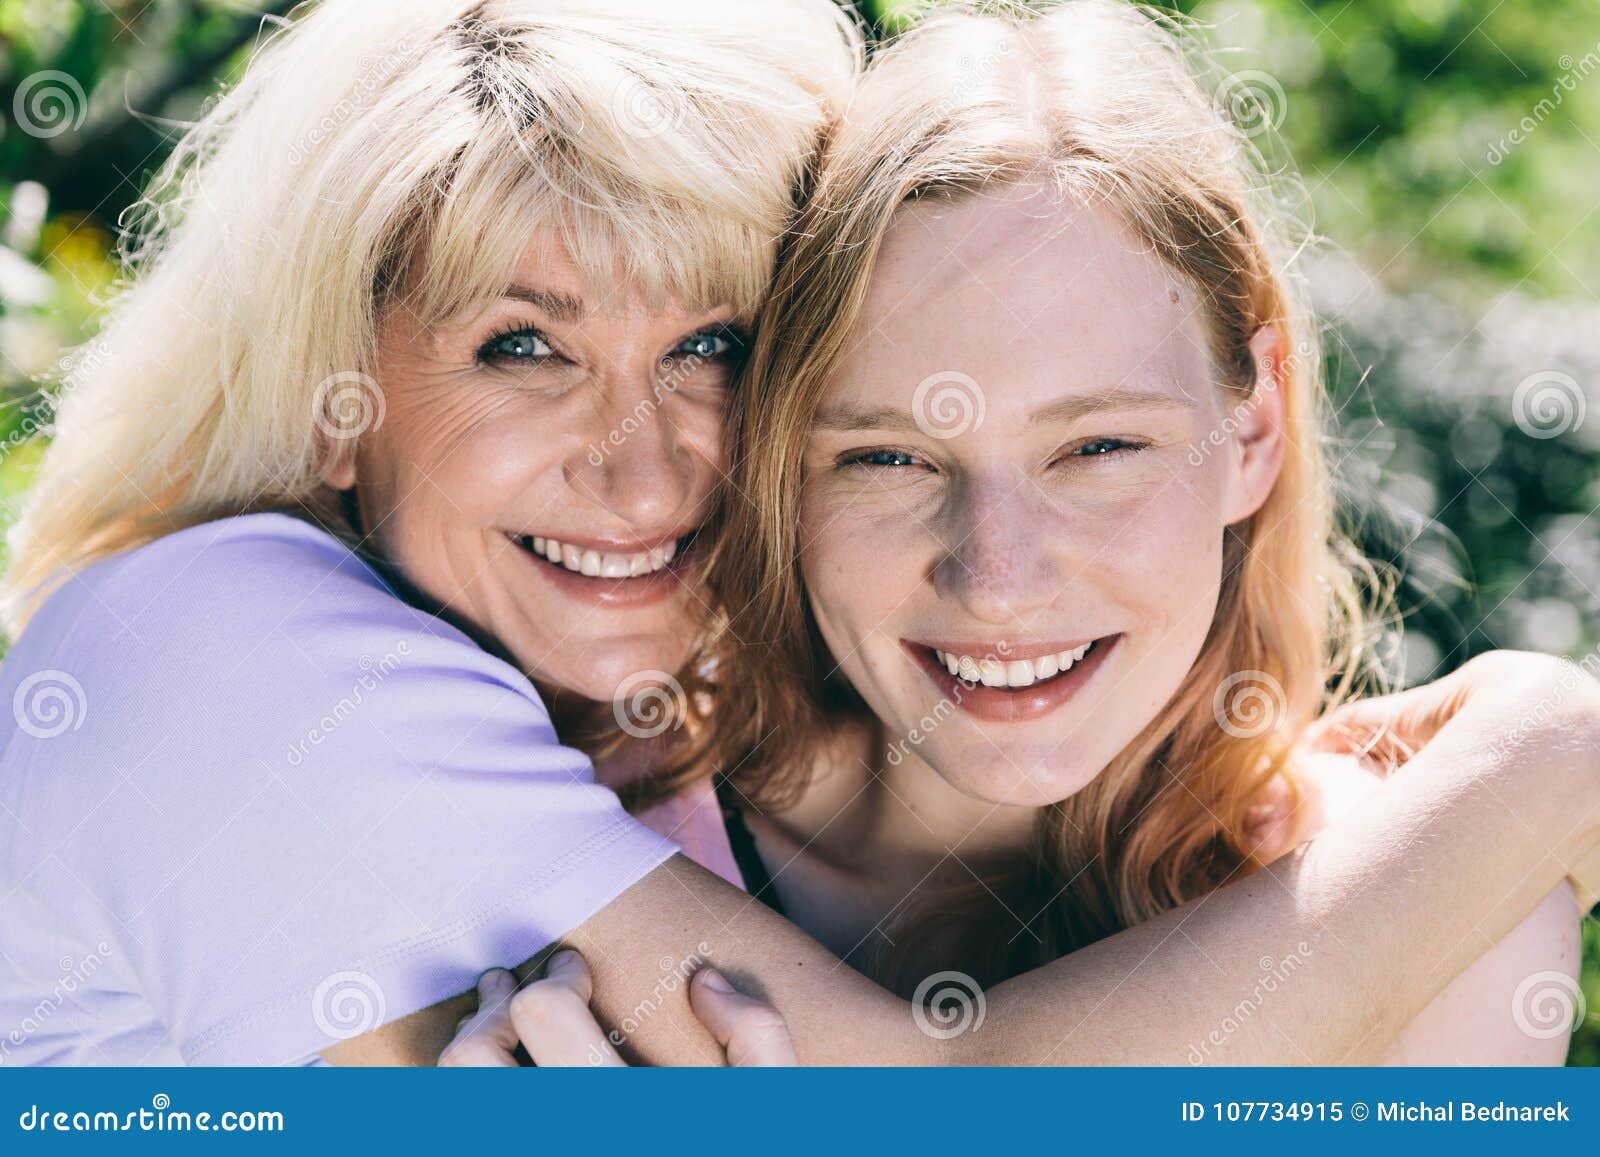 Older Woman Hugging Young Woman Stock Image Image Of Girl Love